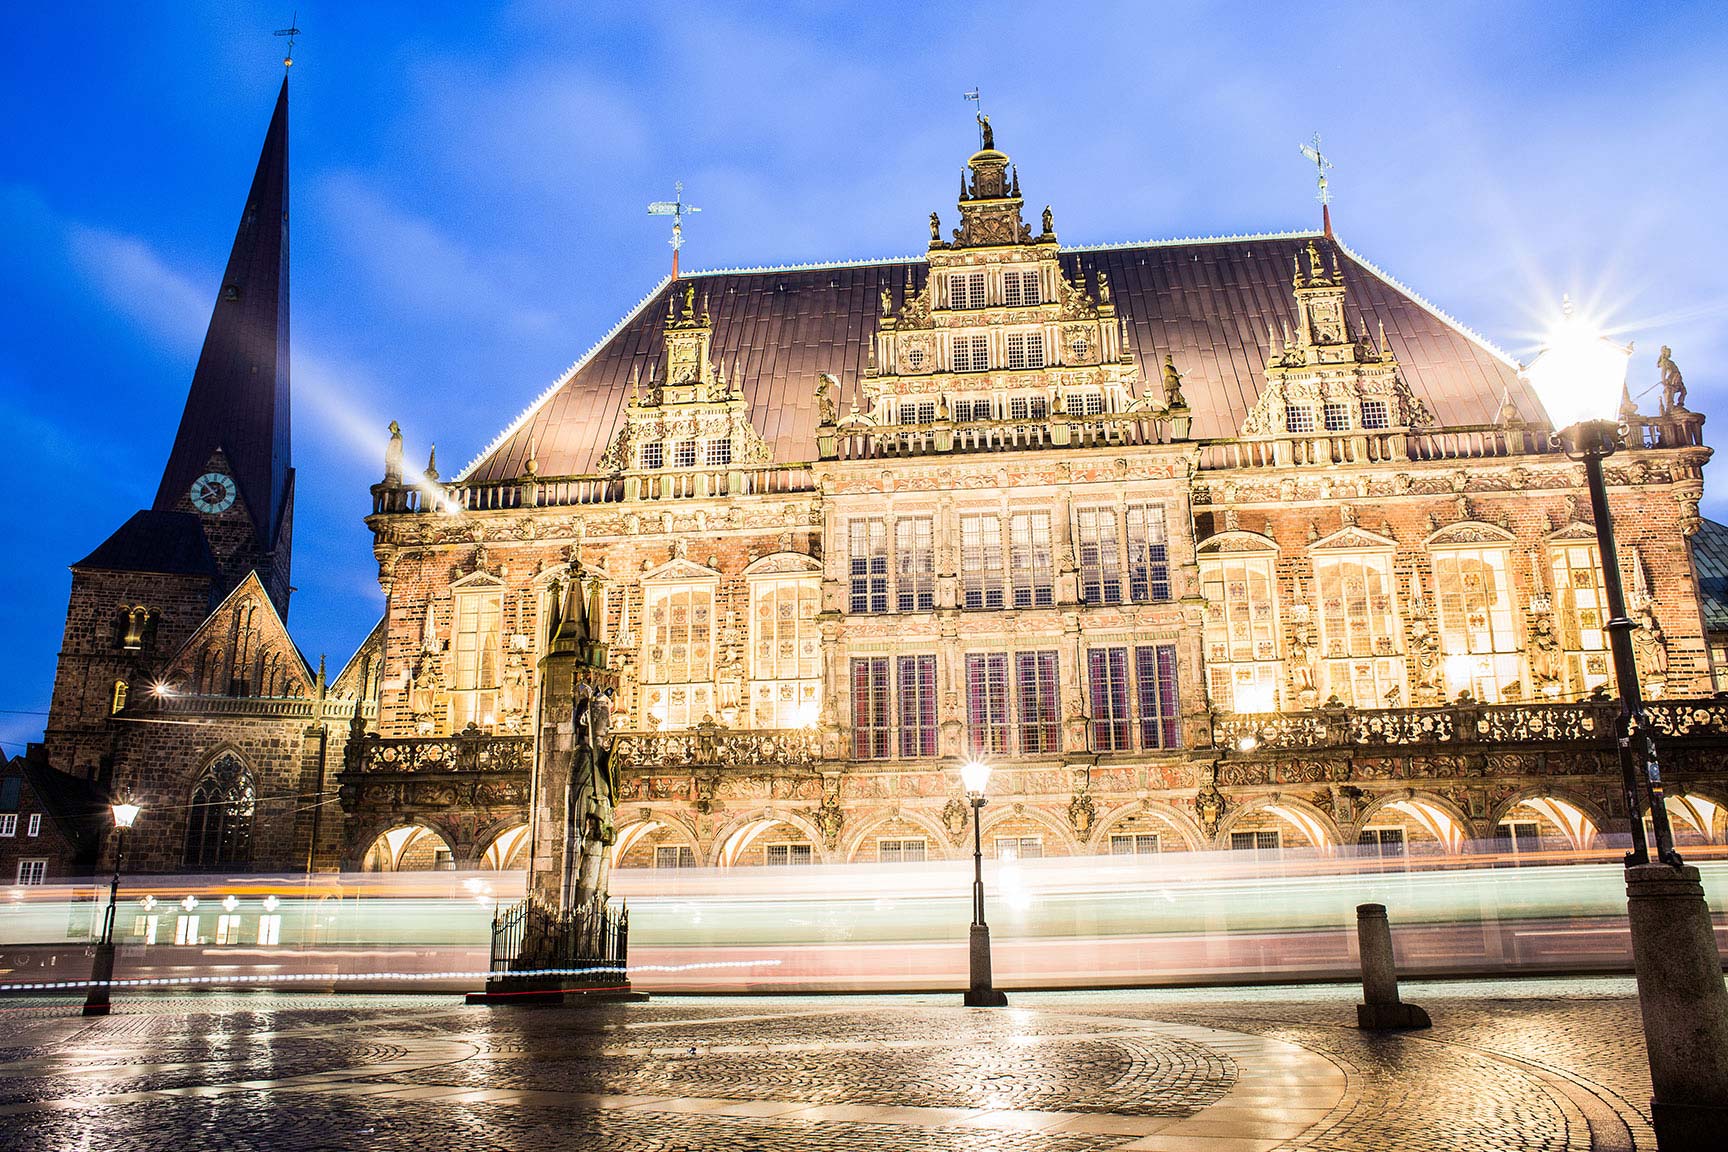 The precious city hall of Bremen by night with many lights